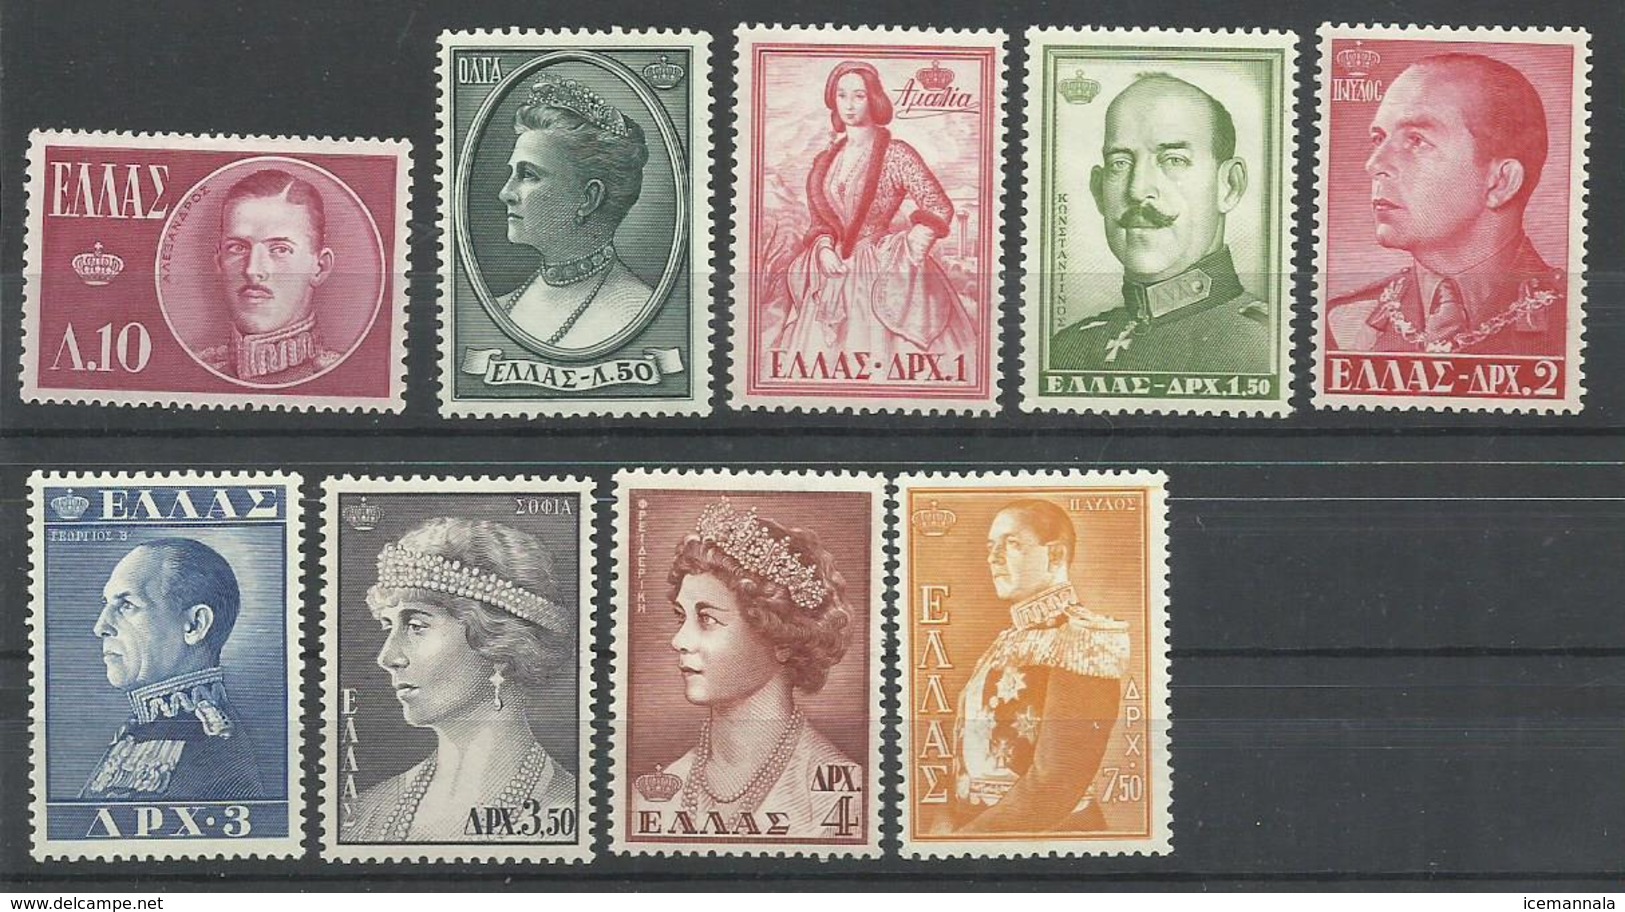 GRECIA YVERT 640,643,645/50,652   MNH  **,  EXCEPTO 645  MH  * - Unused Stamps